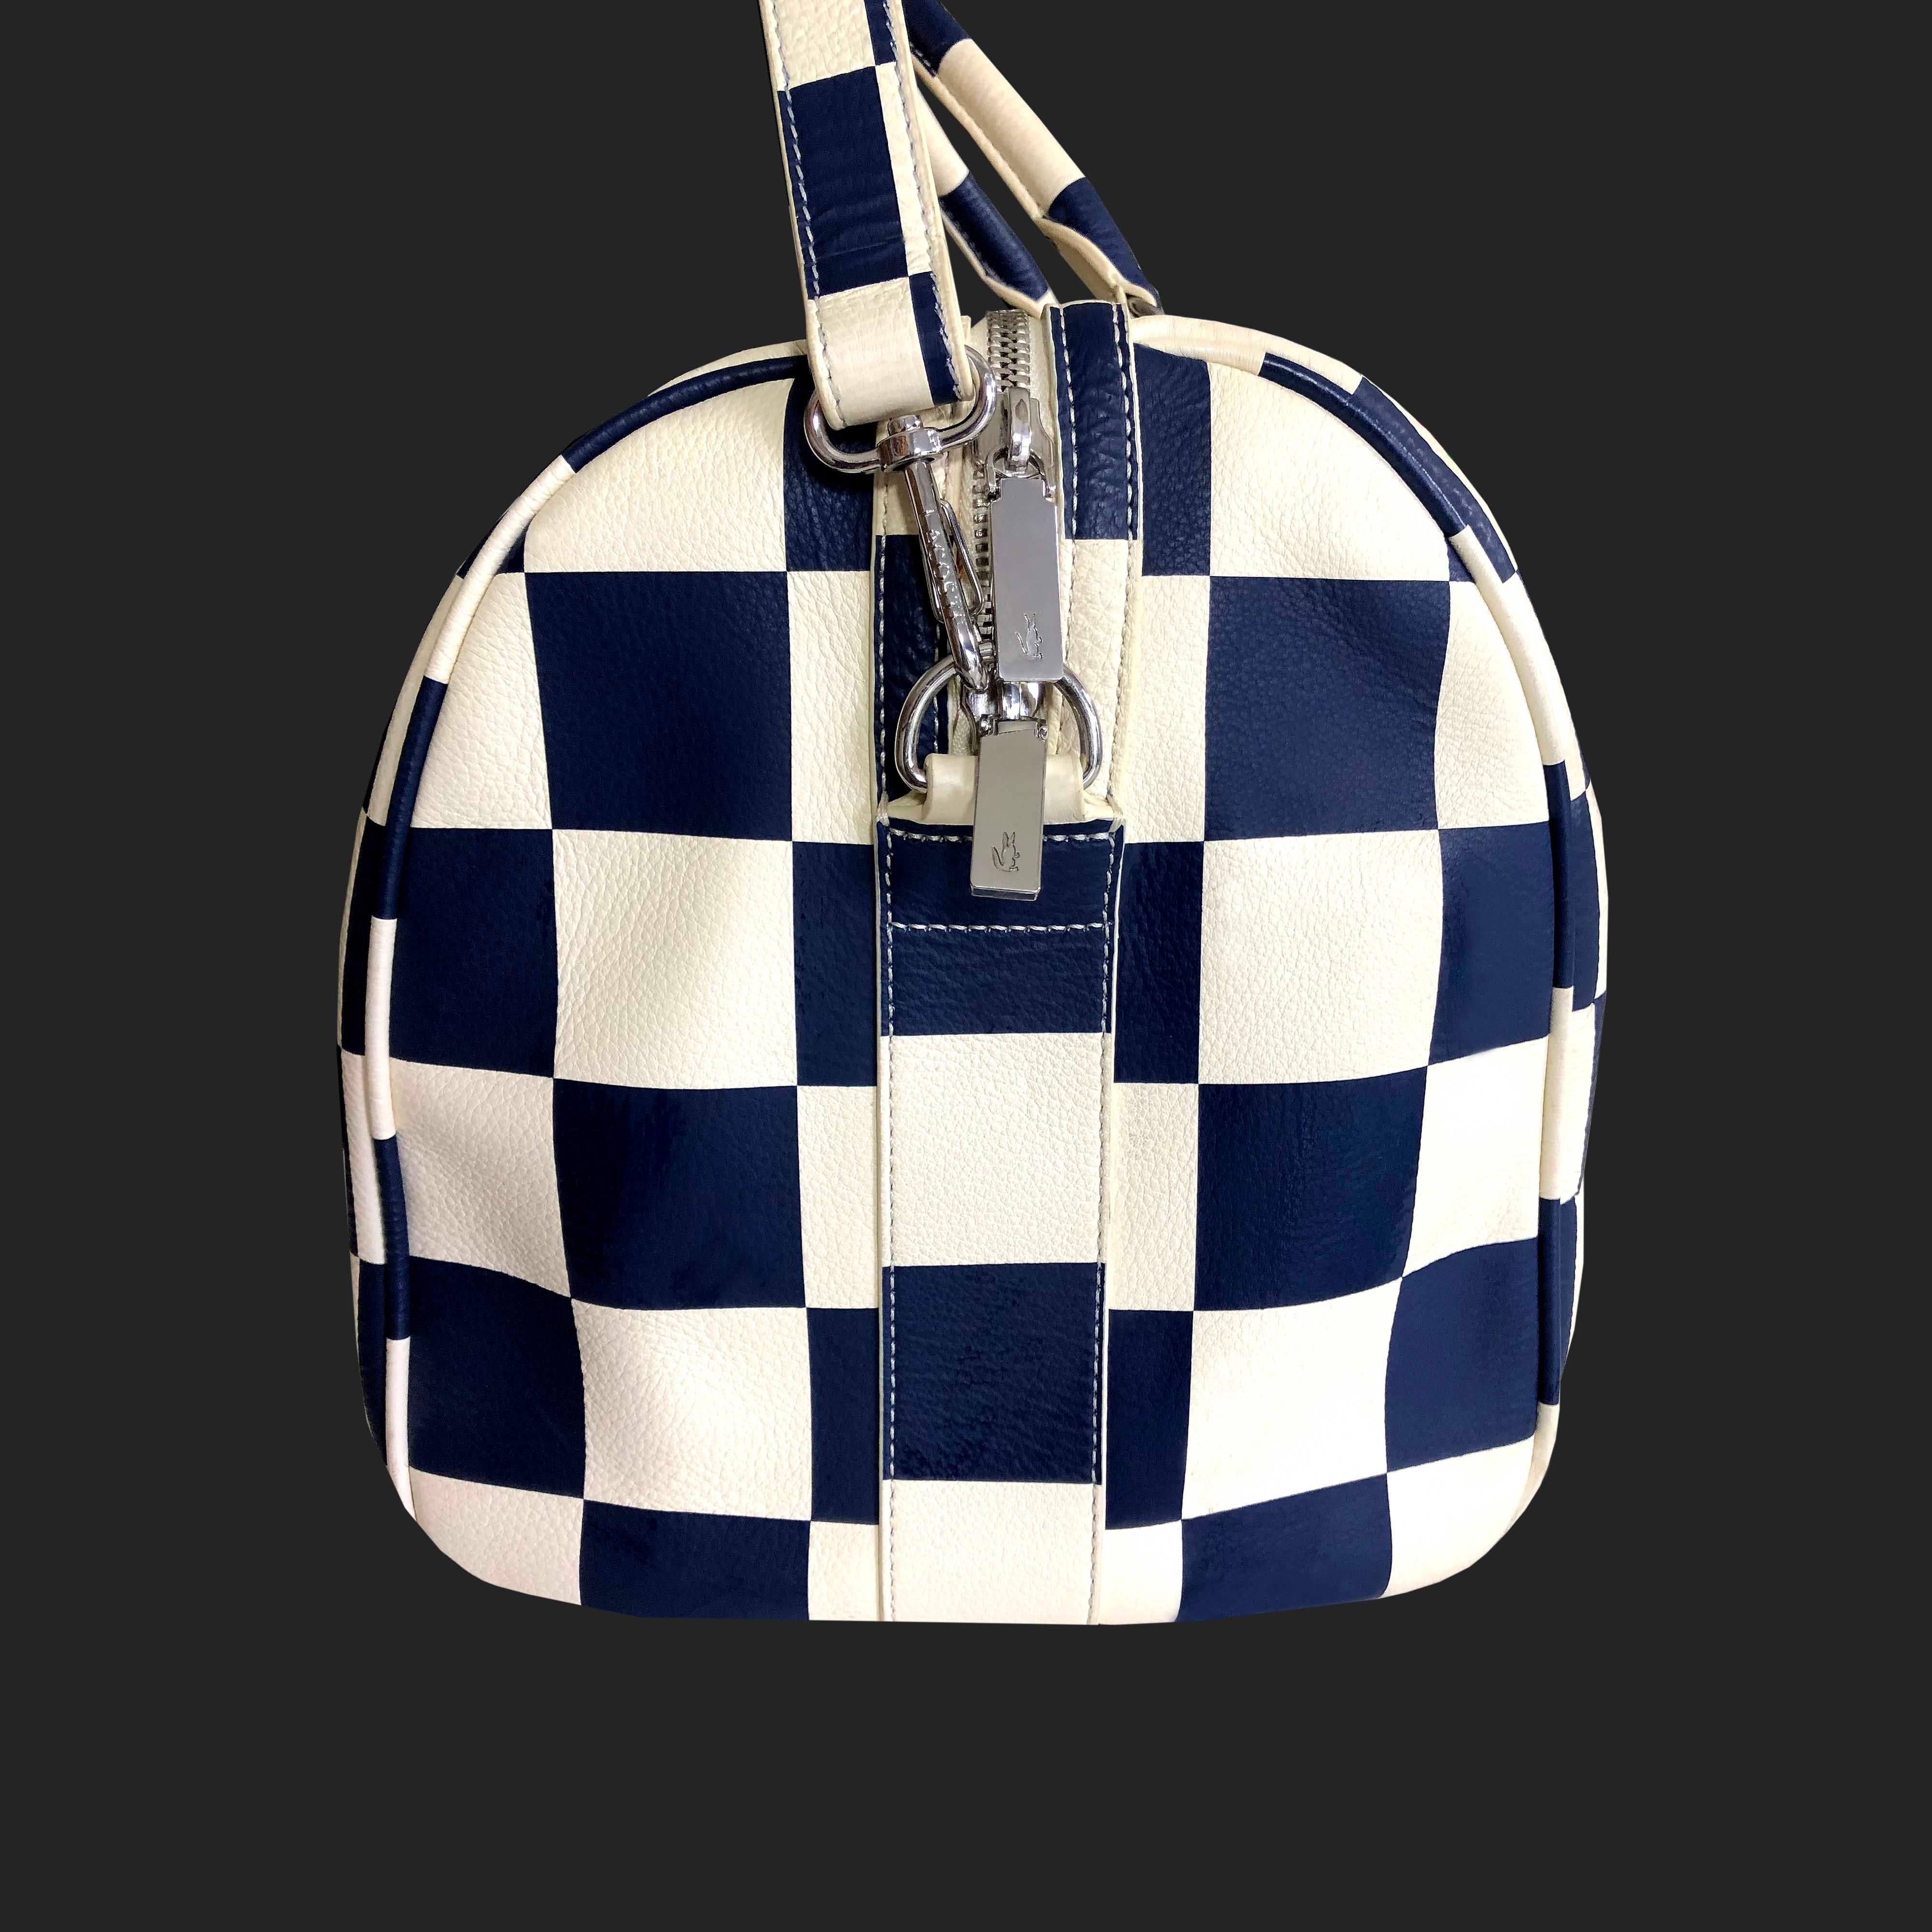 Product Details: Lacoste - Leather Weekend / Gym Bag - Cream + Navy Blue Check Leather + Metal Lacoste Logo - Leather Piping Edging Throughout - Detachable Shoulder Strap - Silver ‘Lacoste’ Logo Hardware Throughout - Padded Handles - Navy Cotton